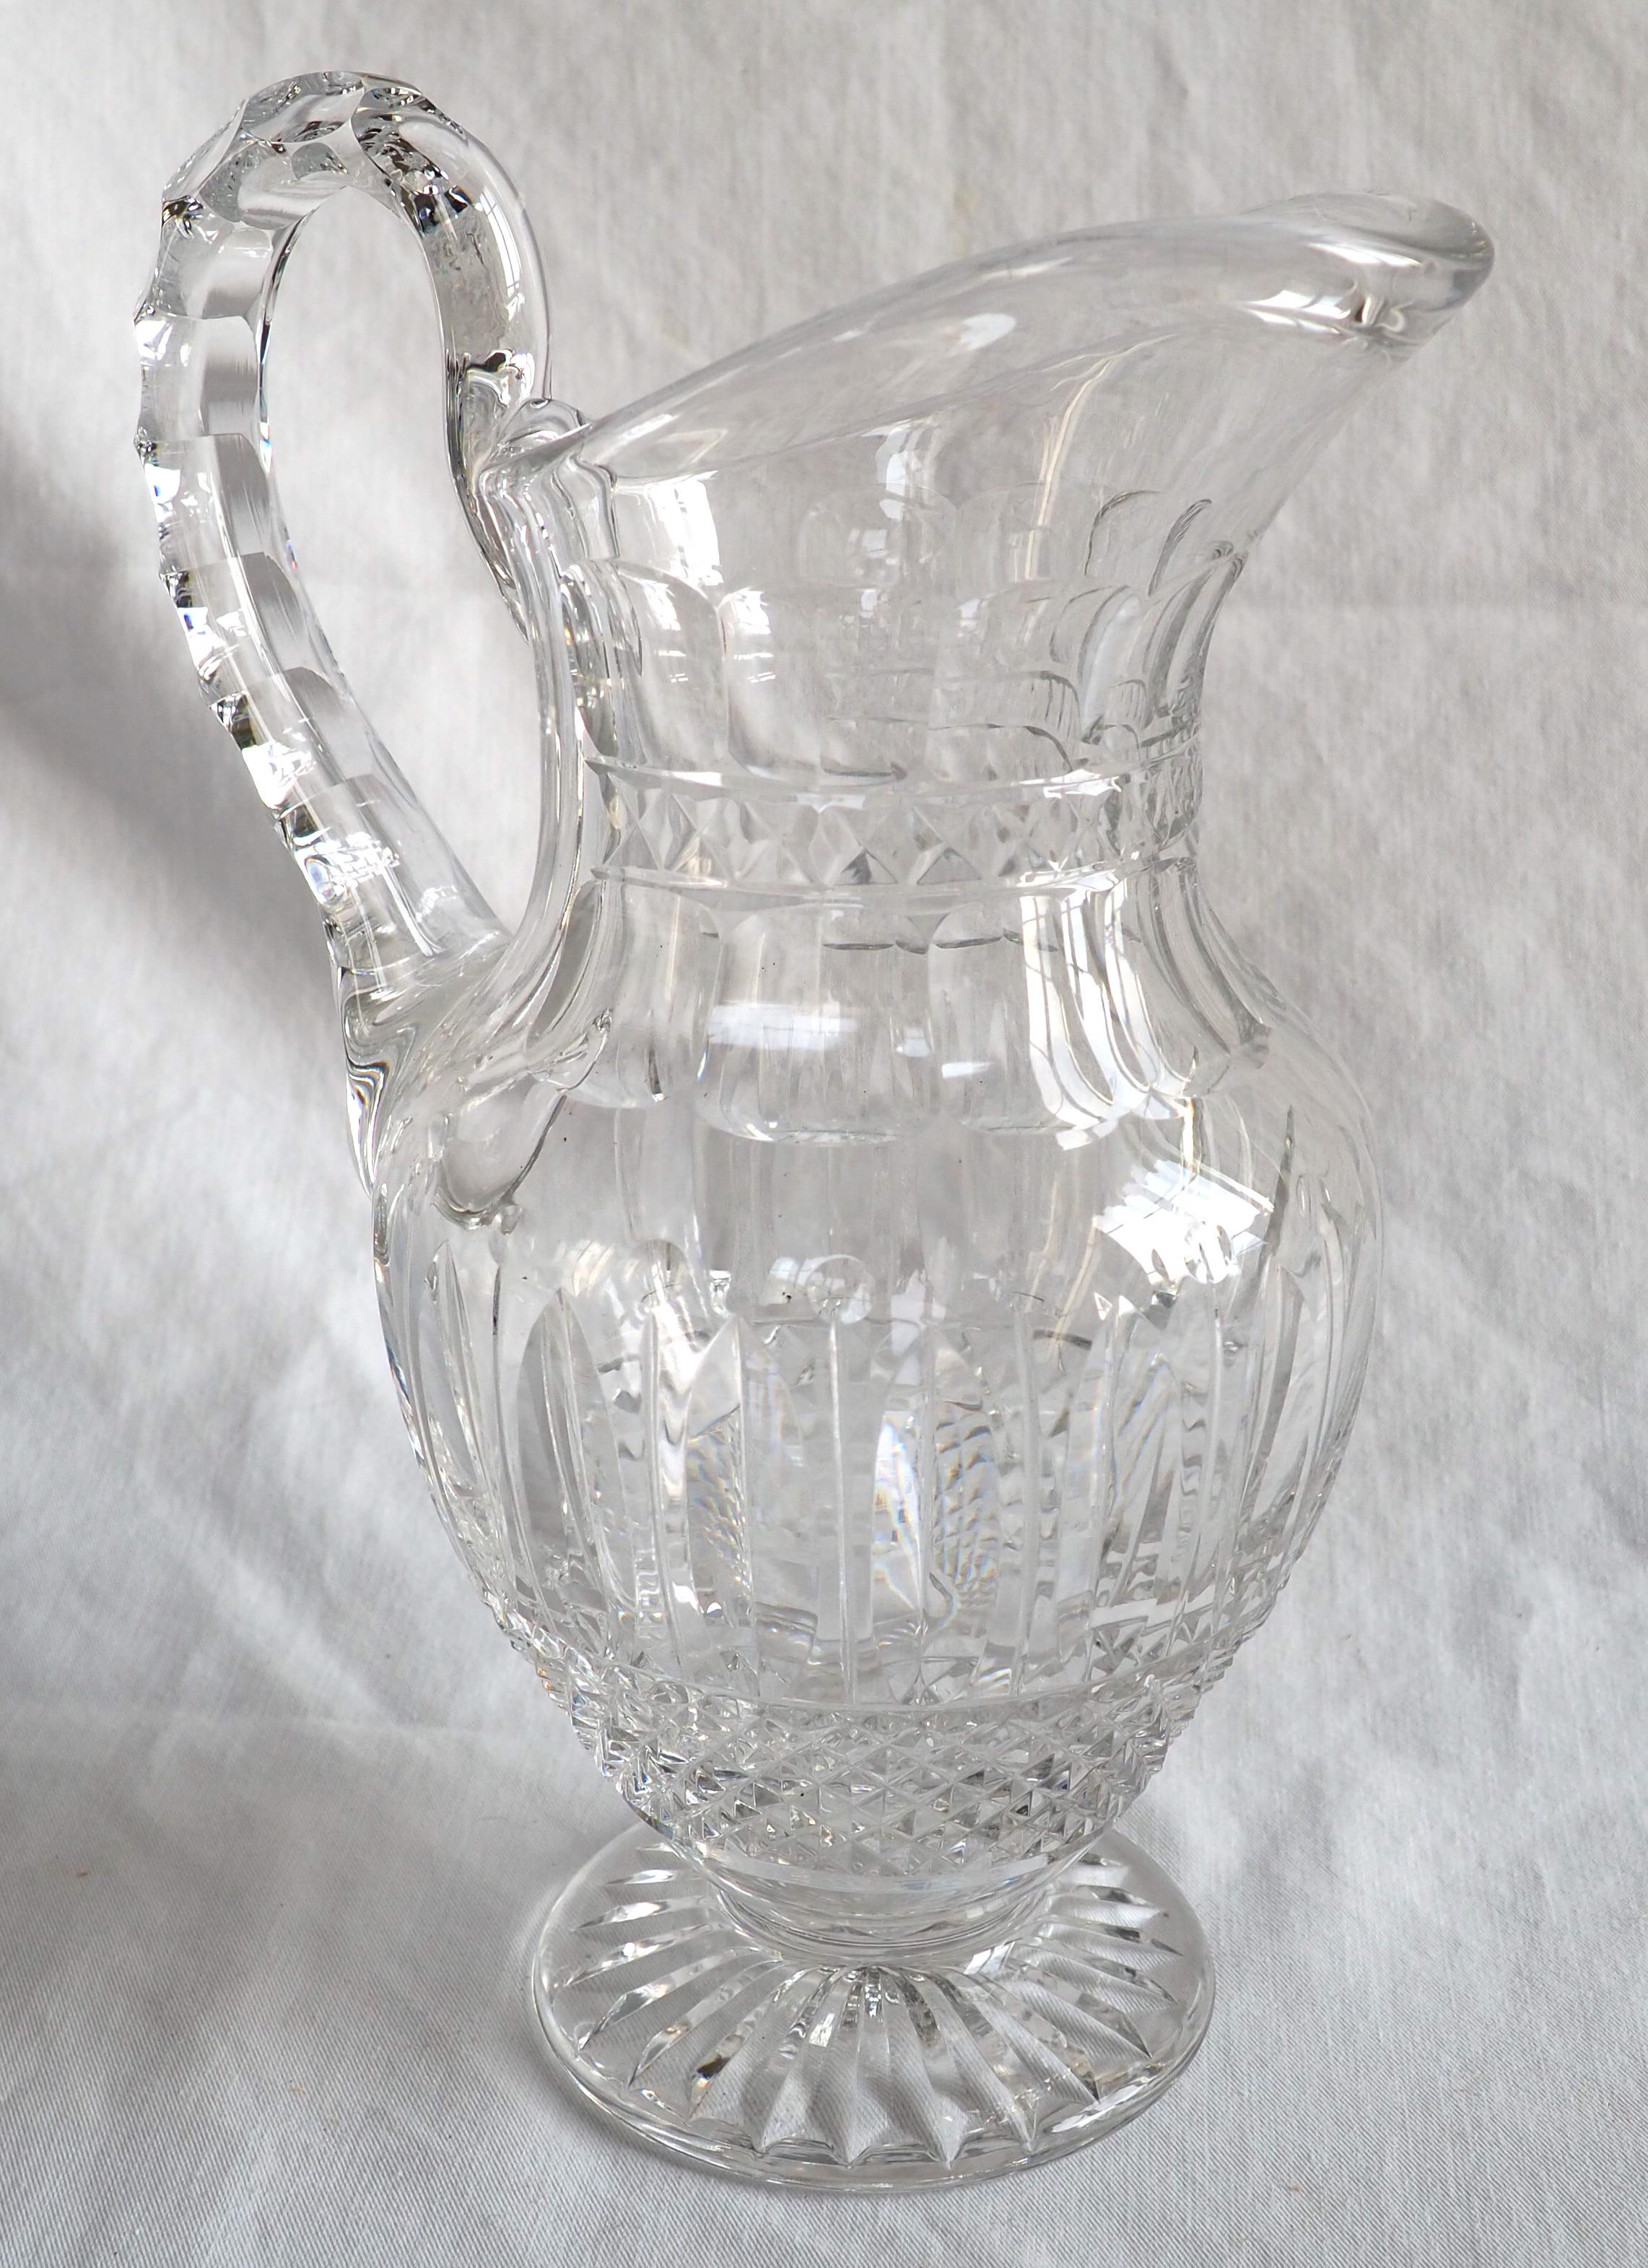 20th Century St Louis crystal water pitcher - ewer - Tommy pattern - signed